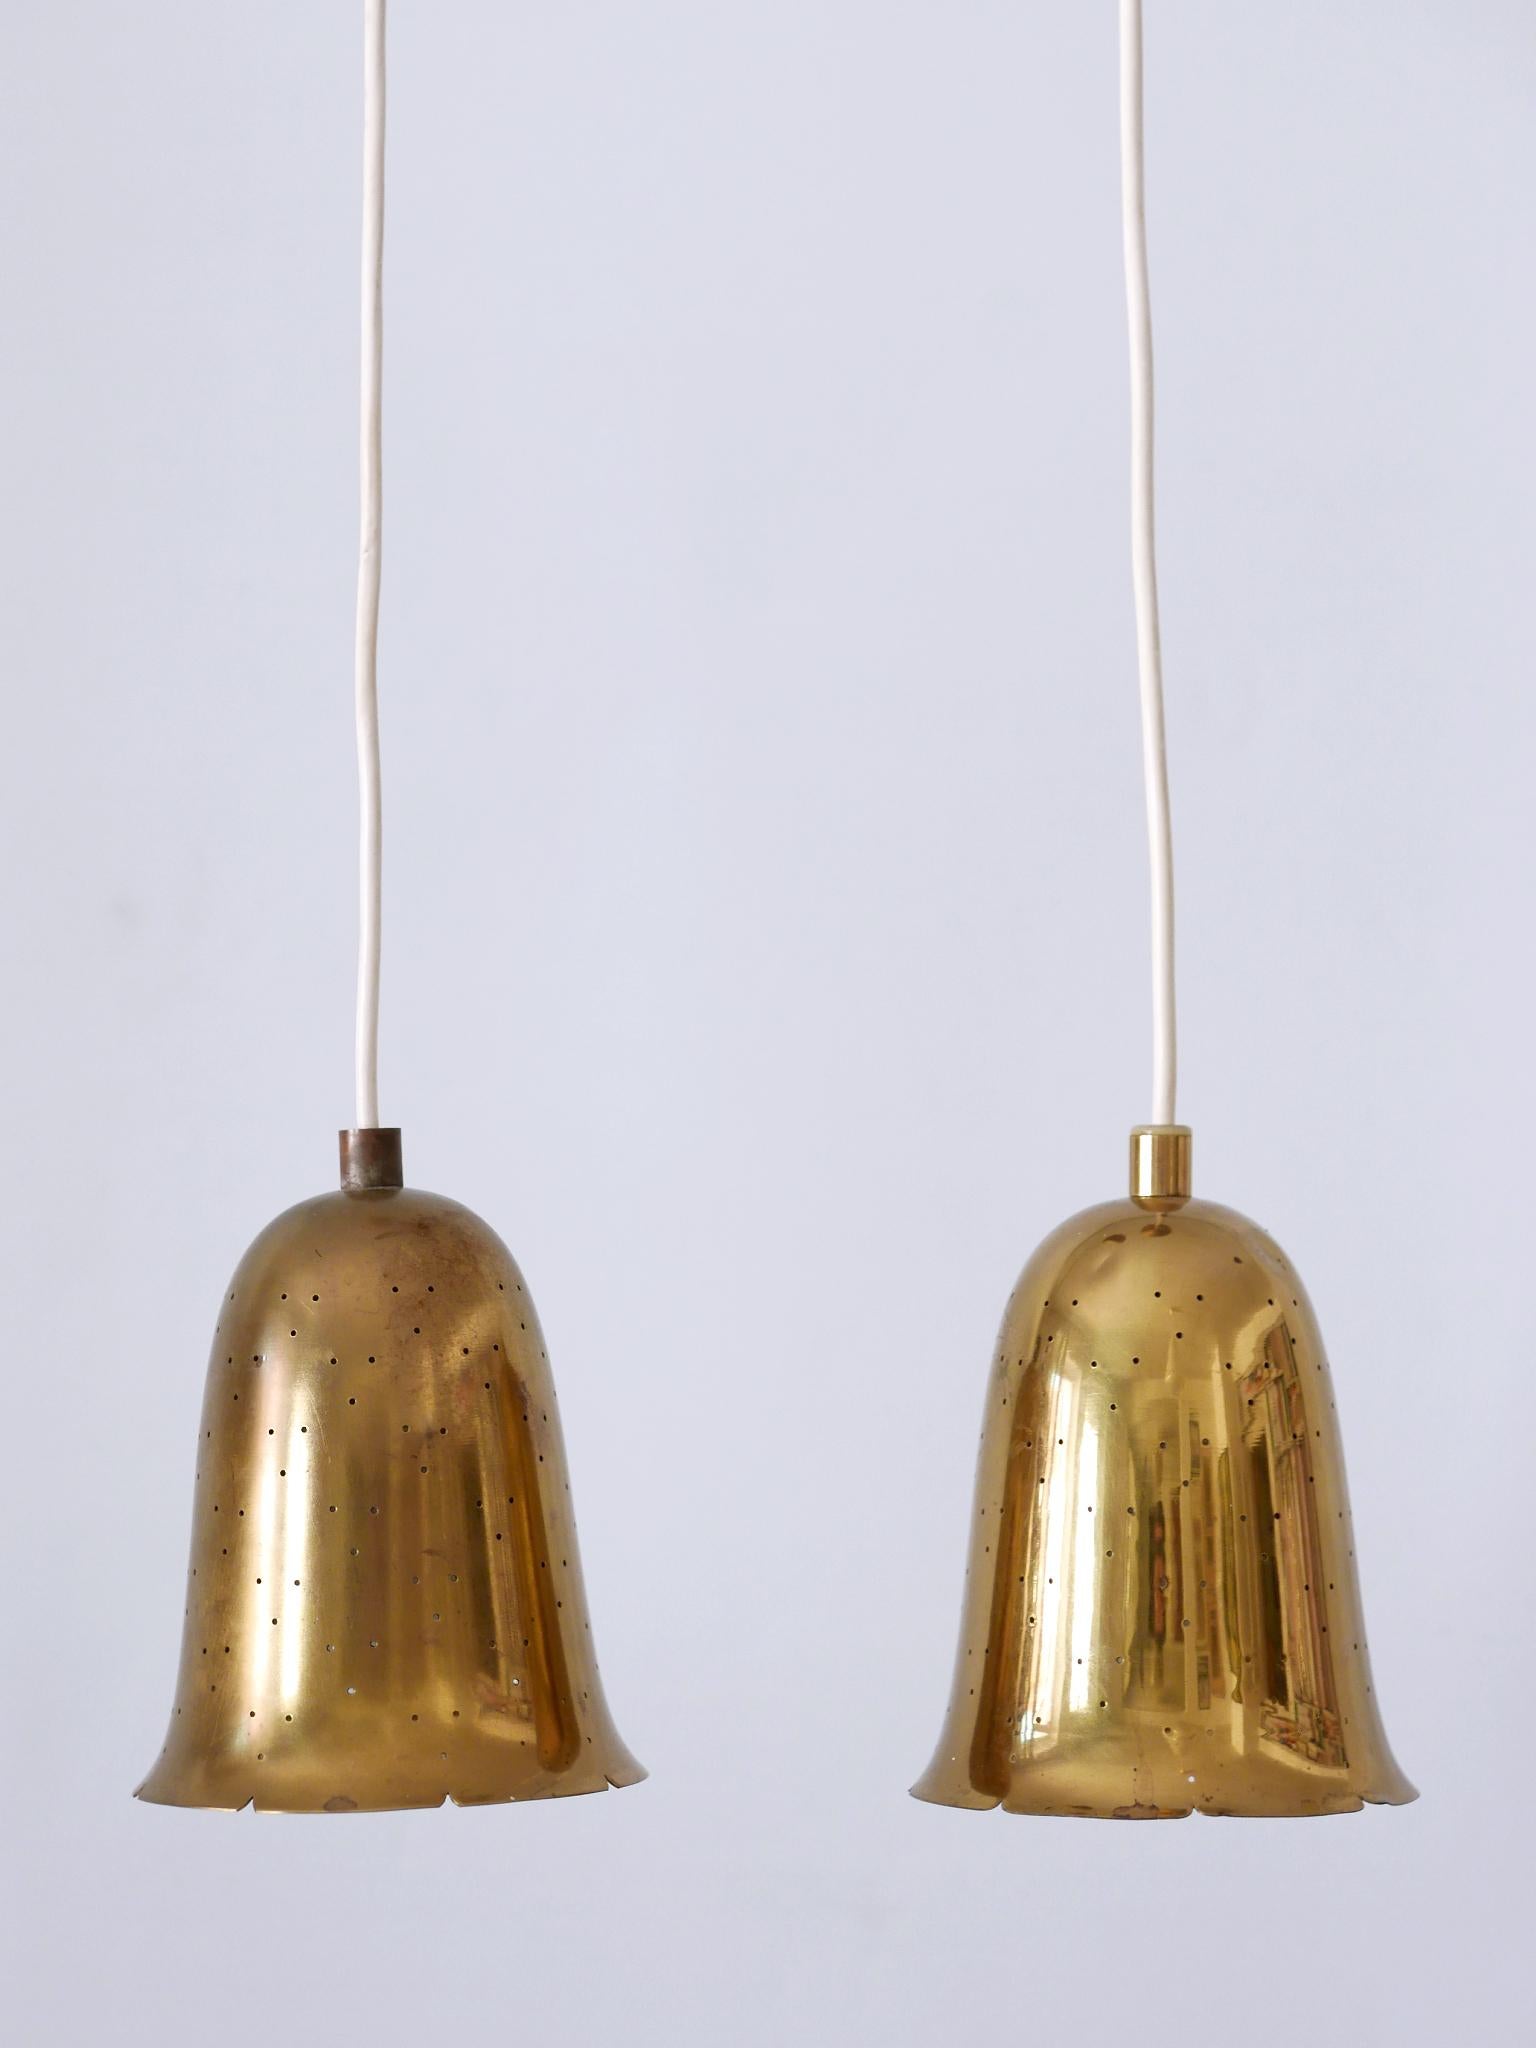 Set of Two Lovely Mid Century Modern Pendant Lamps by Boréns Borås Sweden 1950s 1